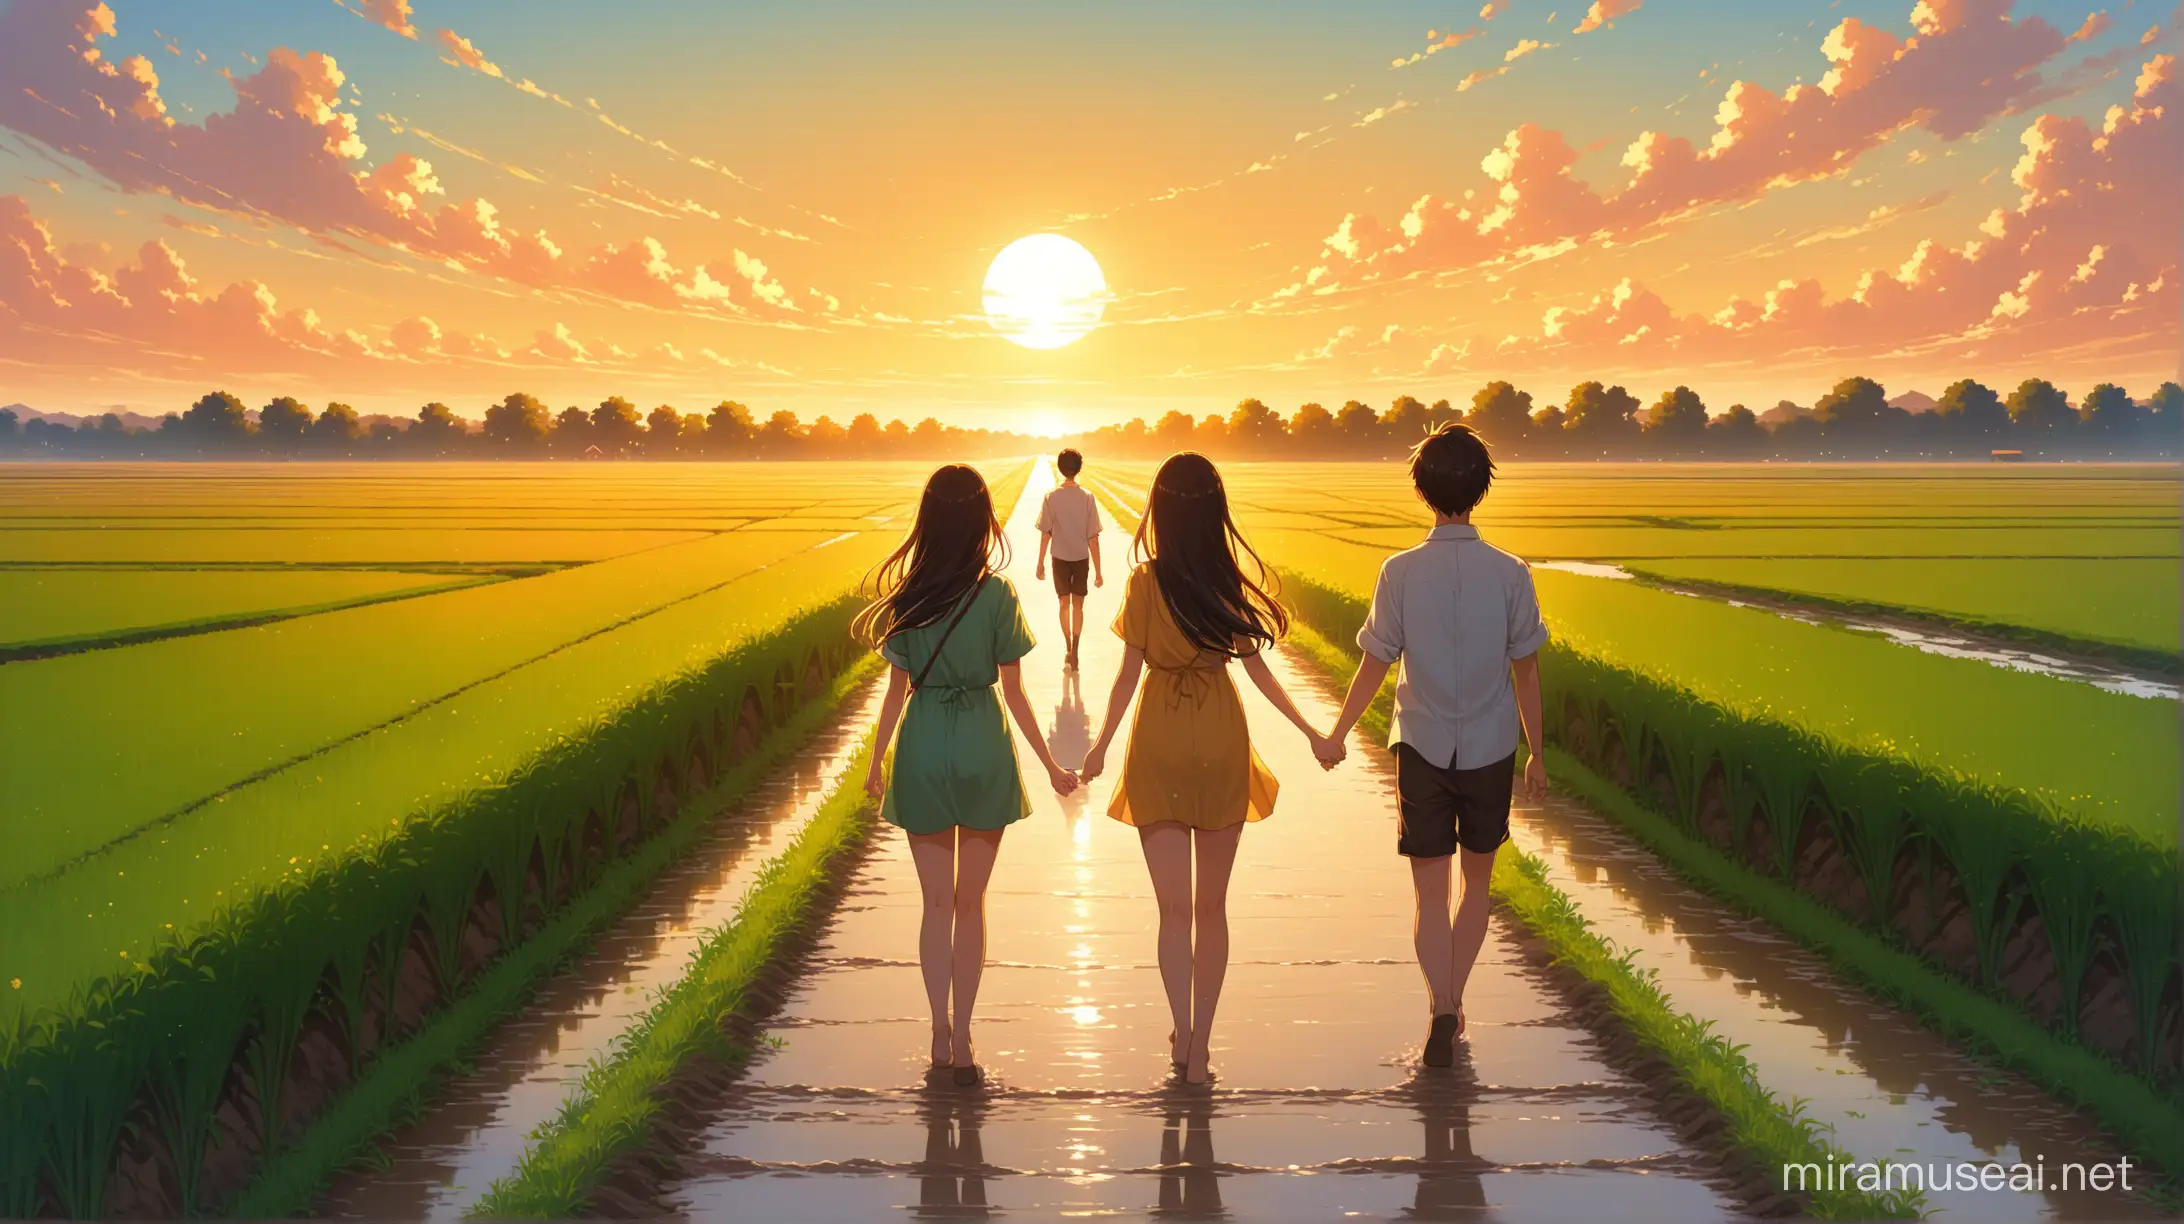 in the time of evening with a plesant and romantic evening. 

oneside fields and the other side canal and in the middle a mud-road higher to canal and fields .

three friend walking together a girl, boy and girl walking towards the sun. 